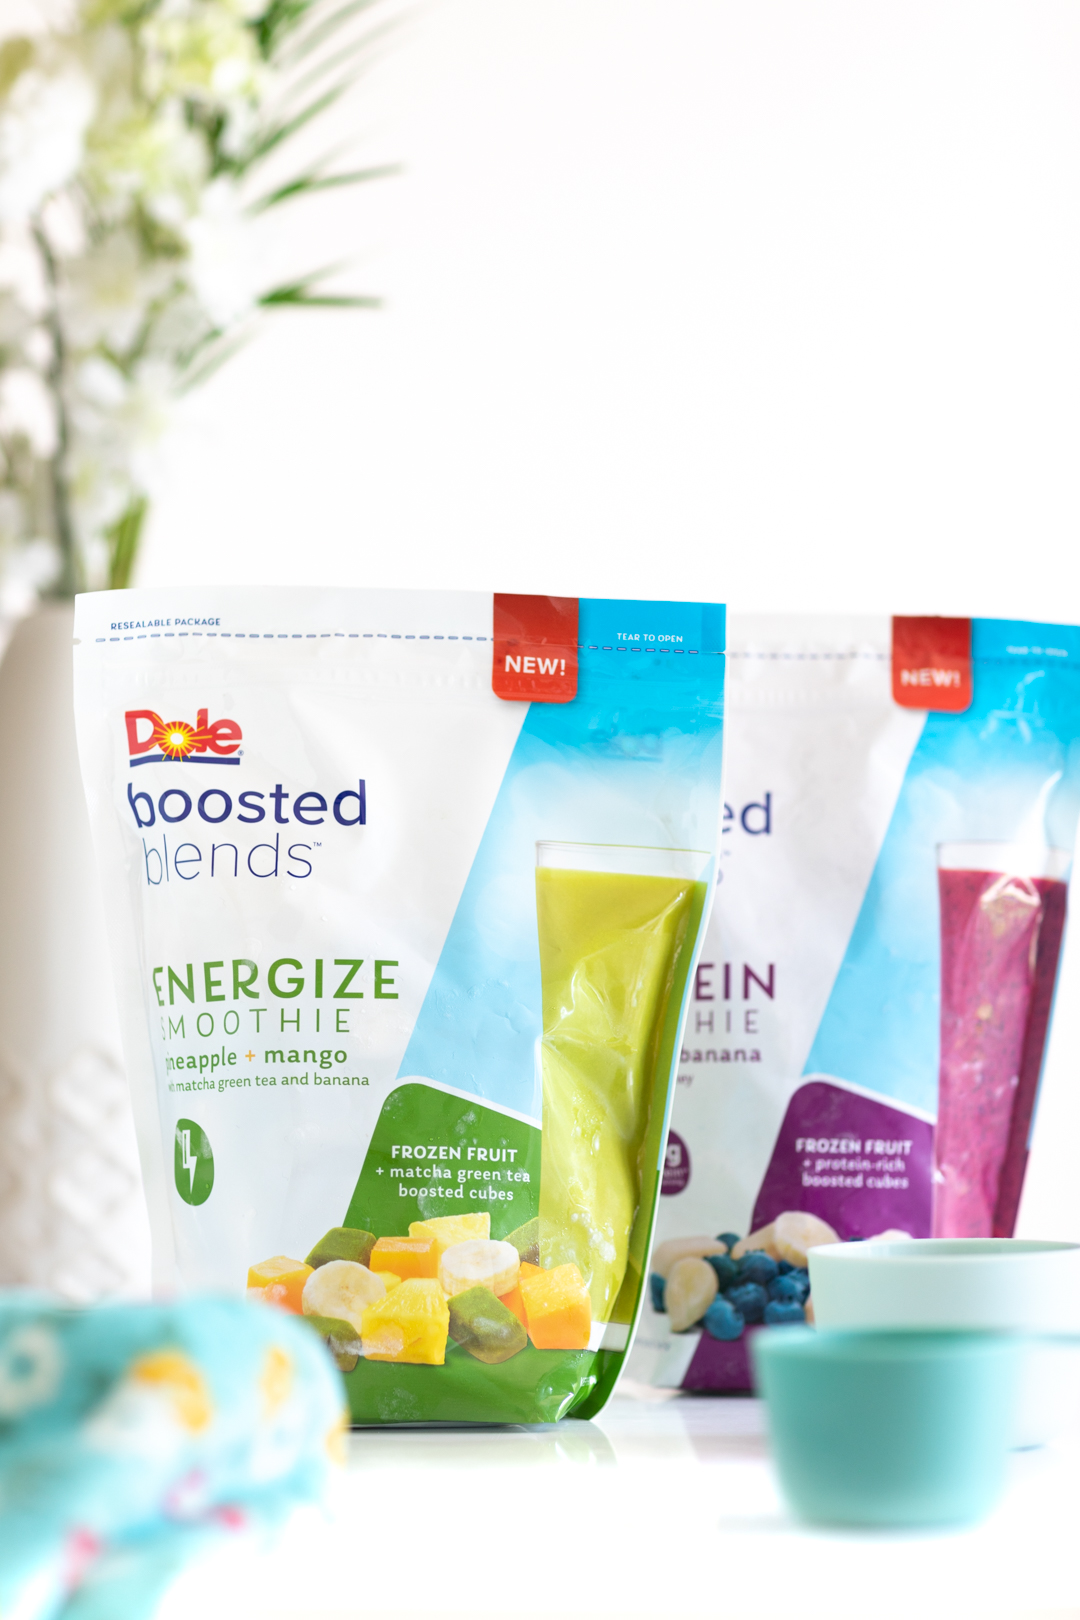 Dole Boosted Blends - Energize variety with addition of matcha green tea.